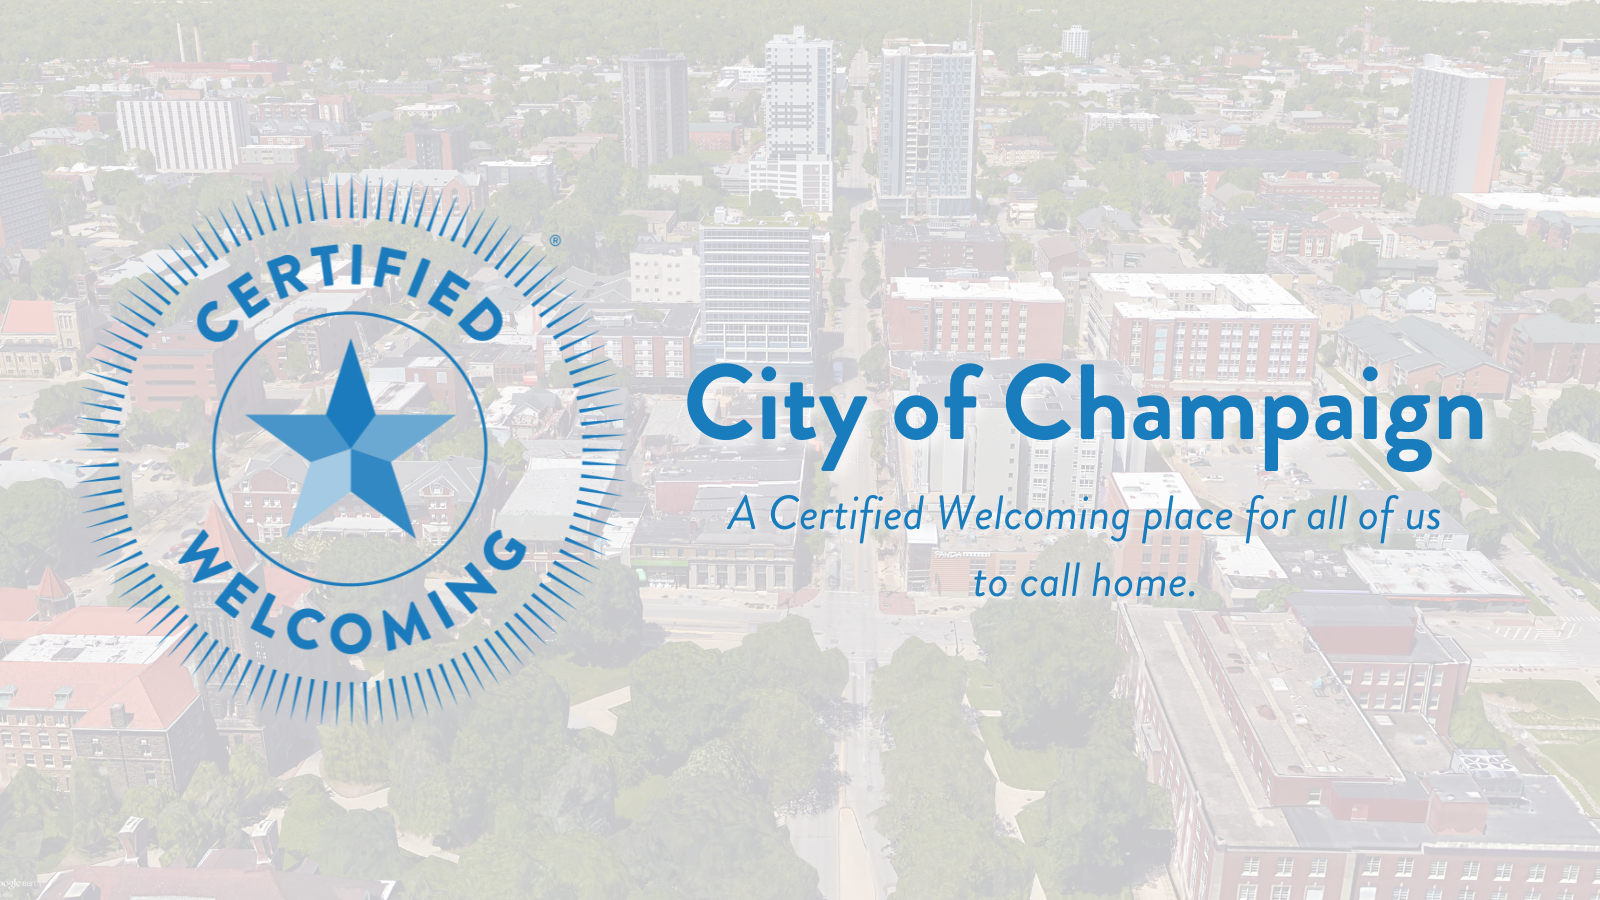 Aerial image of Champaign, Illinois with the Certified Welcoming Seal and text that reads "City of Champaign: A Certified Welcoming place for all of us to call home"